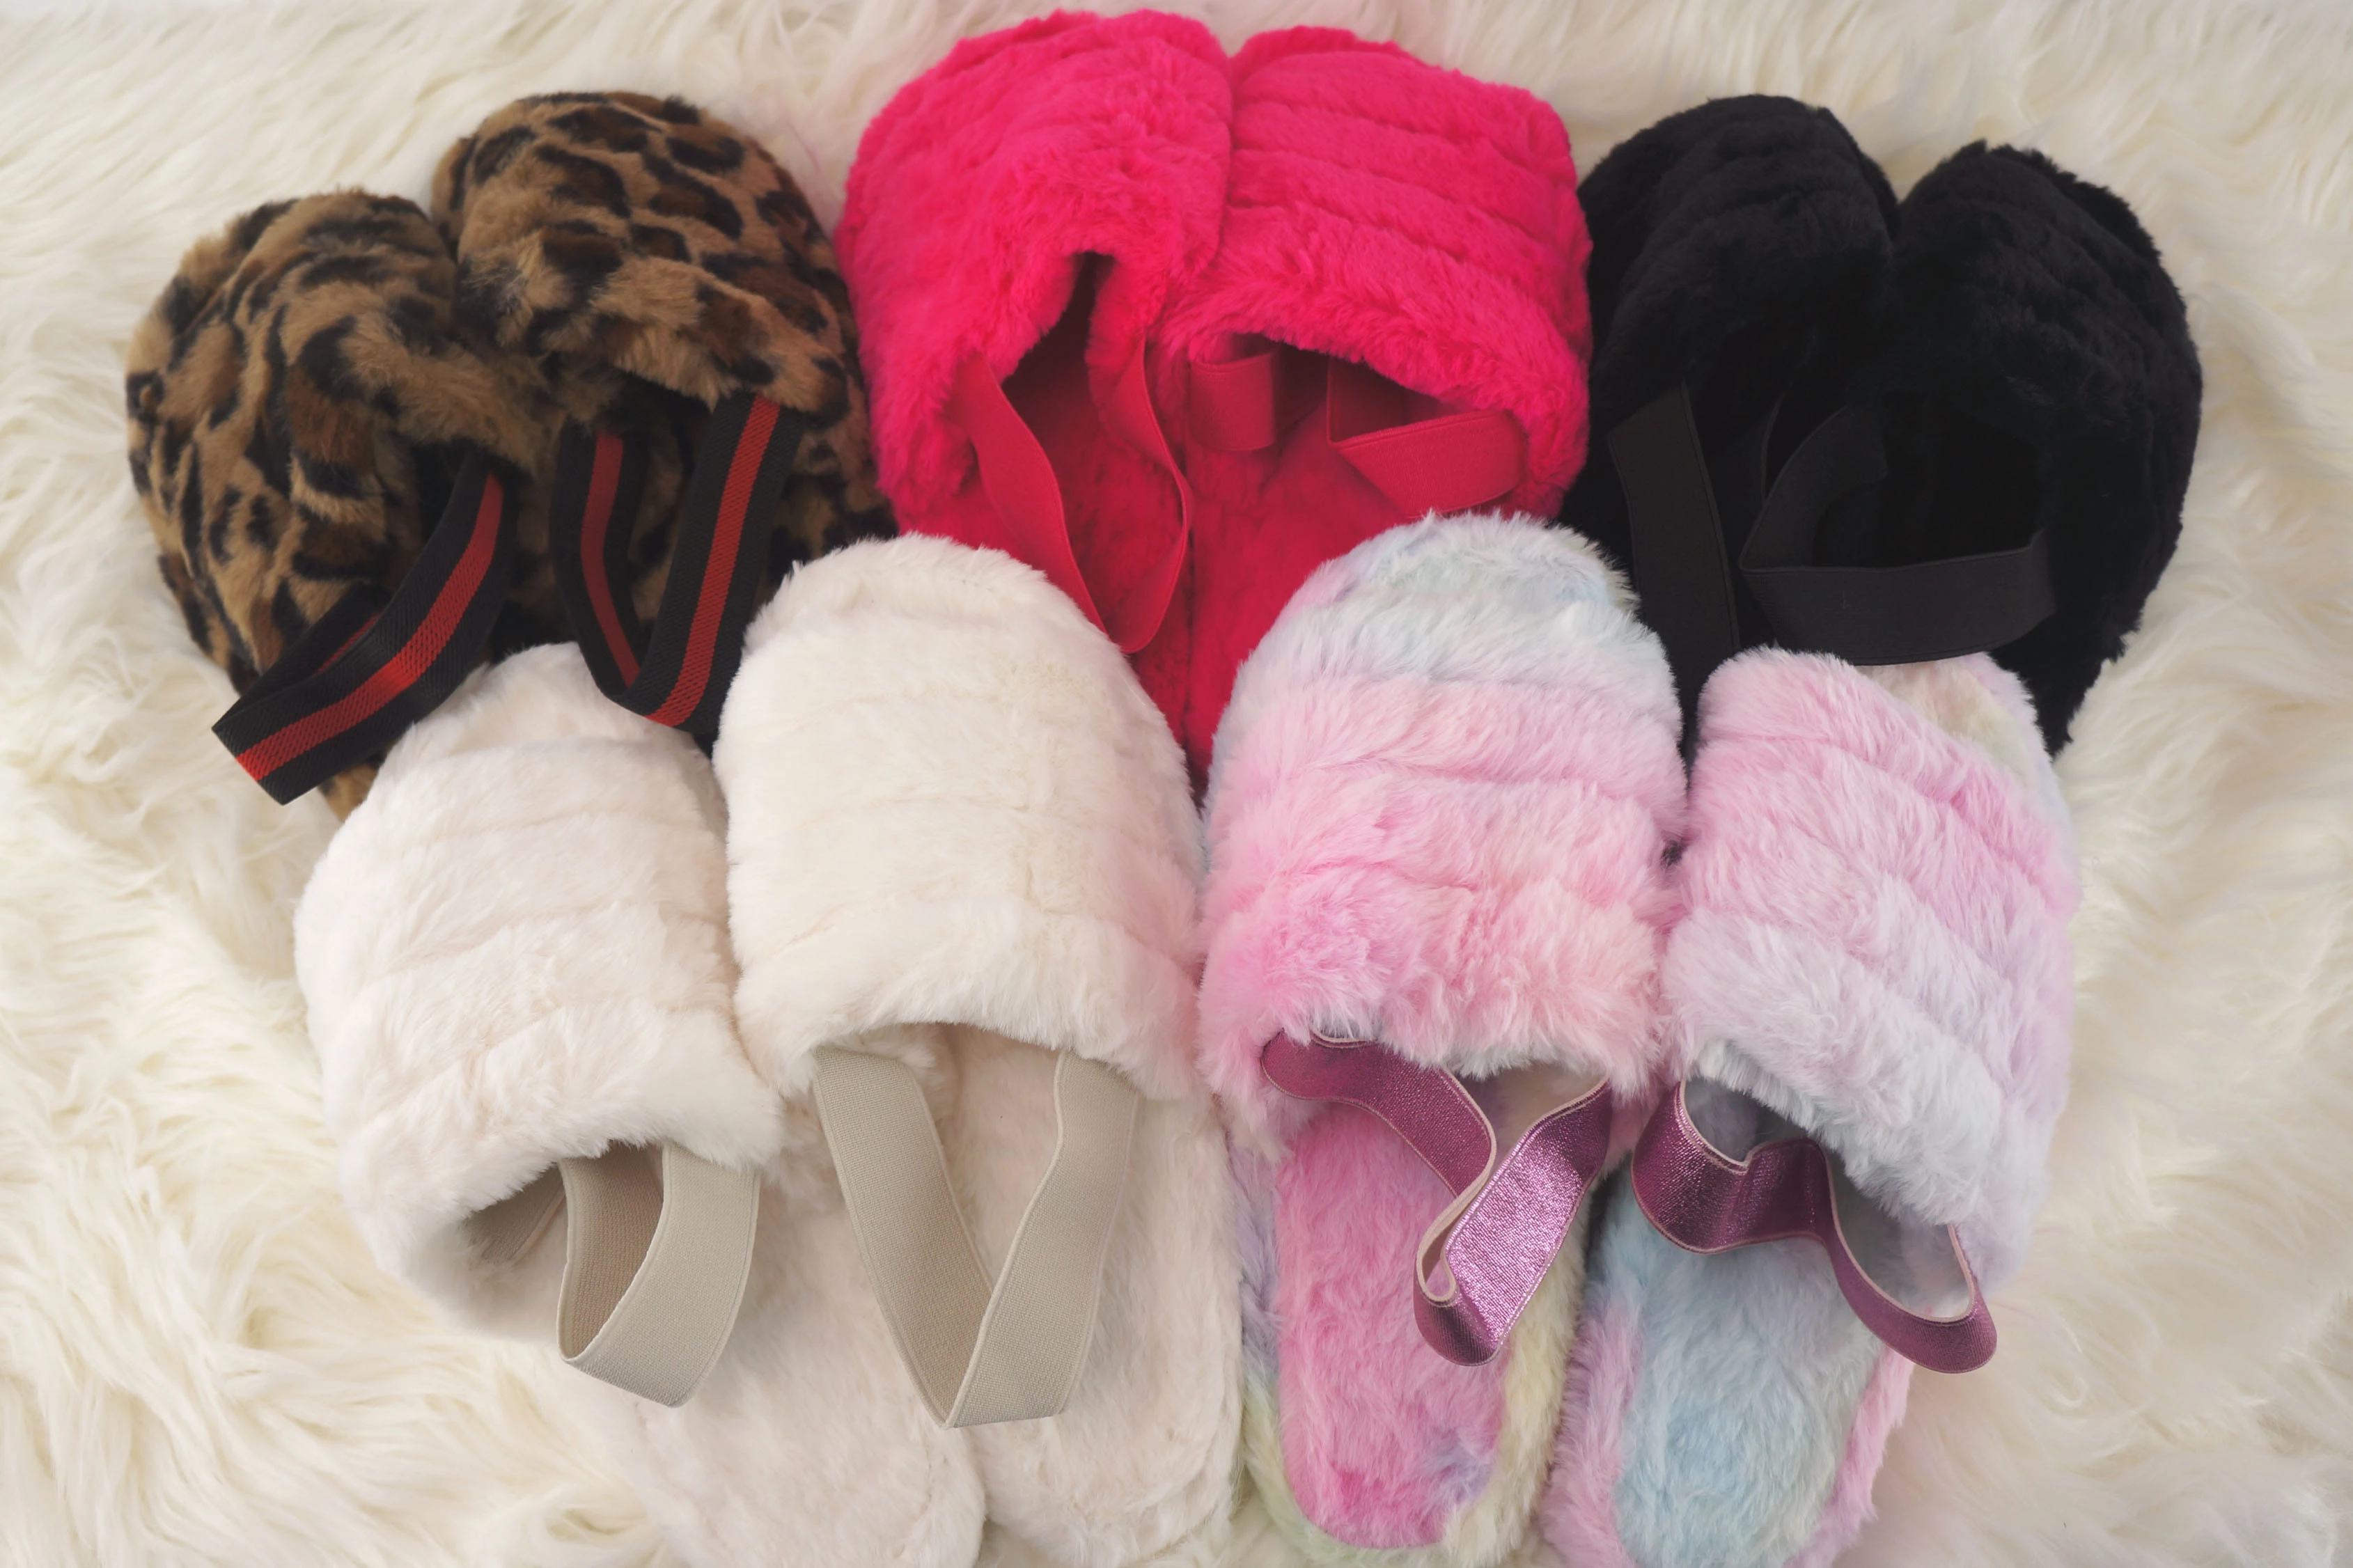 Soft And Warm Indoor Winter Slippers New Fur Slippers of Women  Hot Selling winter wholesale sandals Colorful Faux Fur Slides